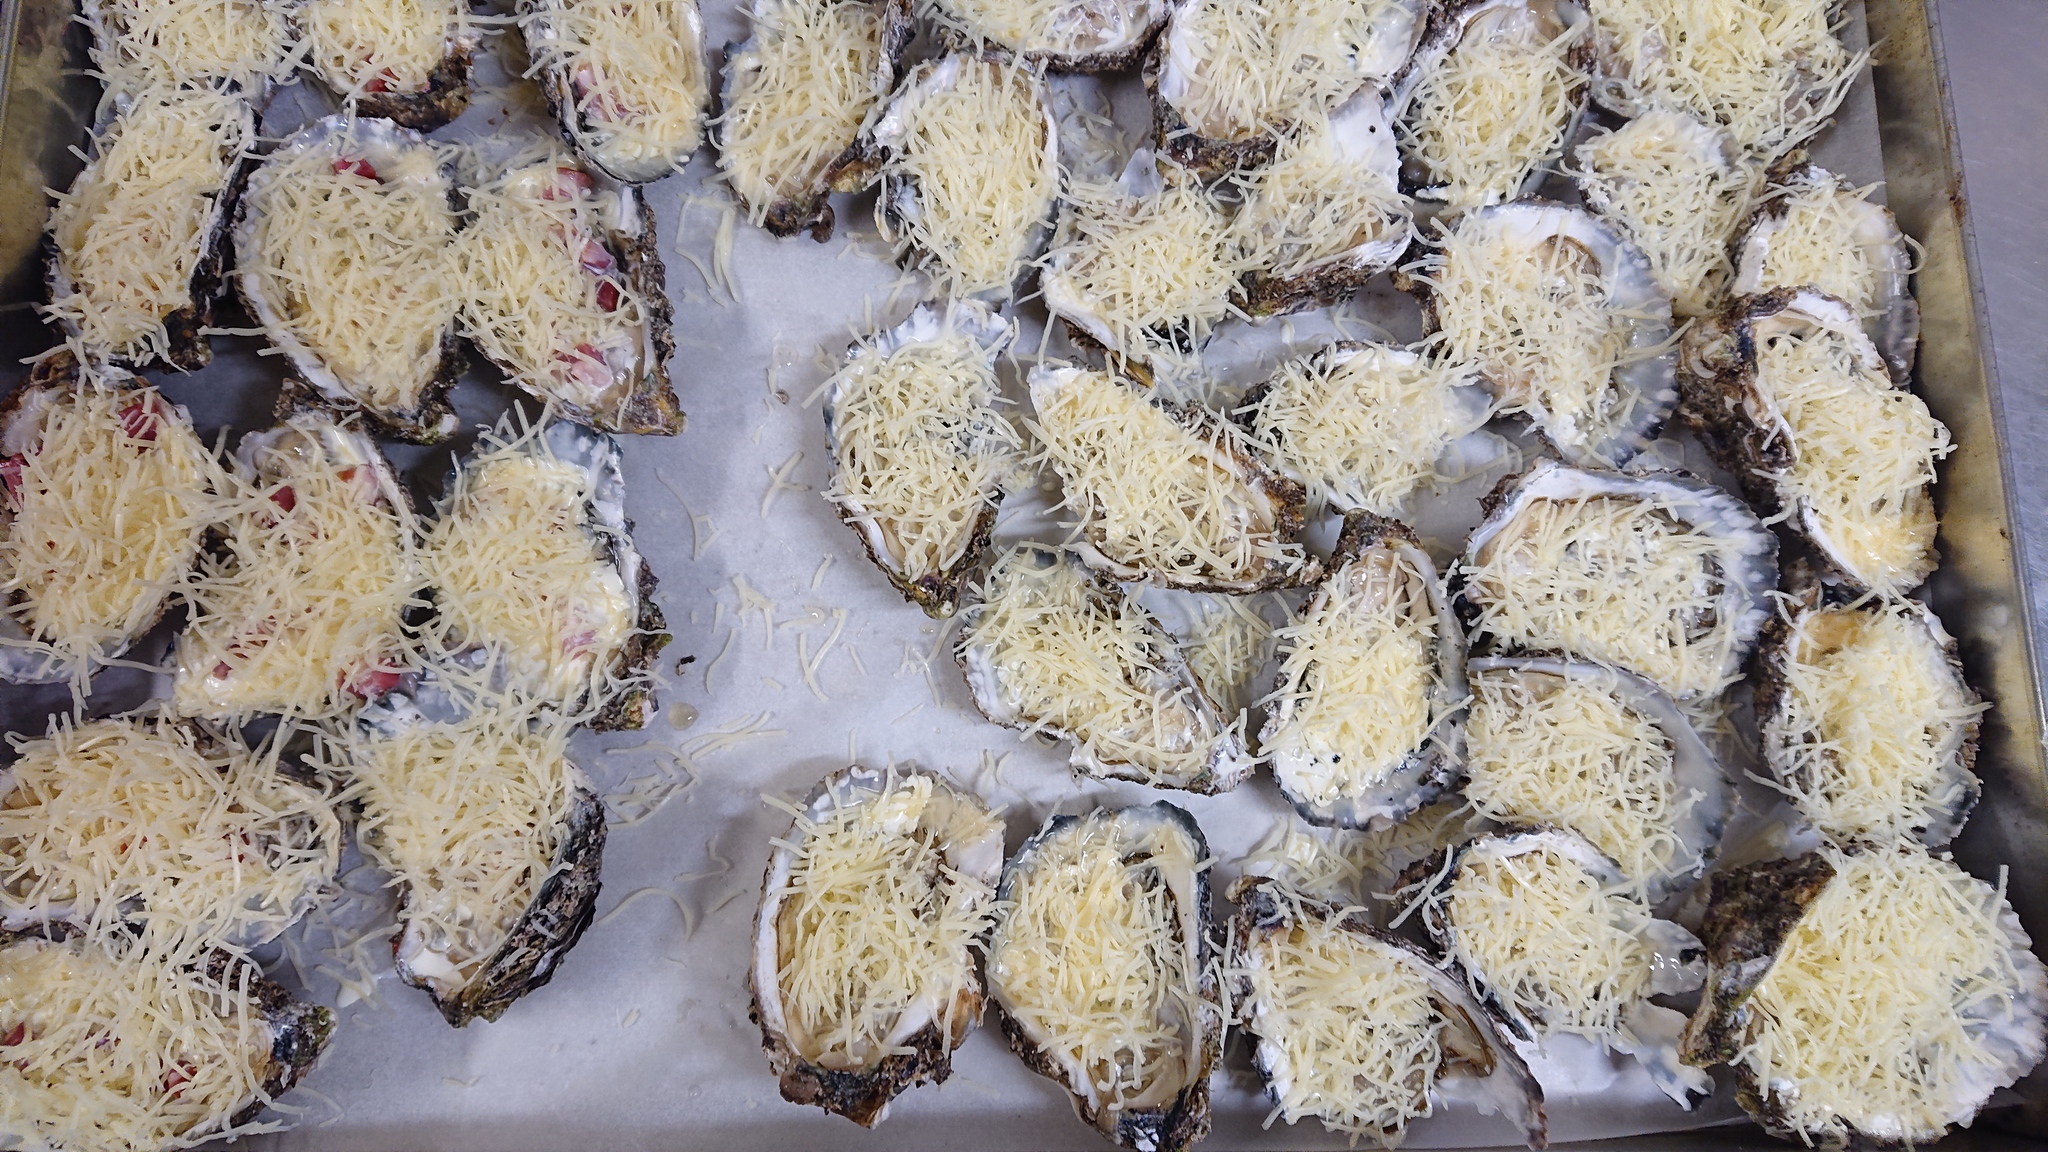 Ostriche di Corsica or Corsican oysters - Longpost, Snack, Cooking, Oysters, My